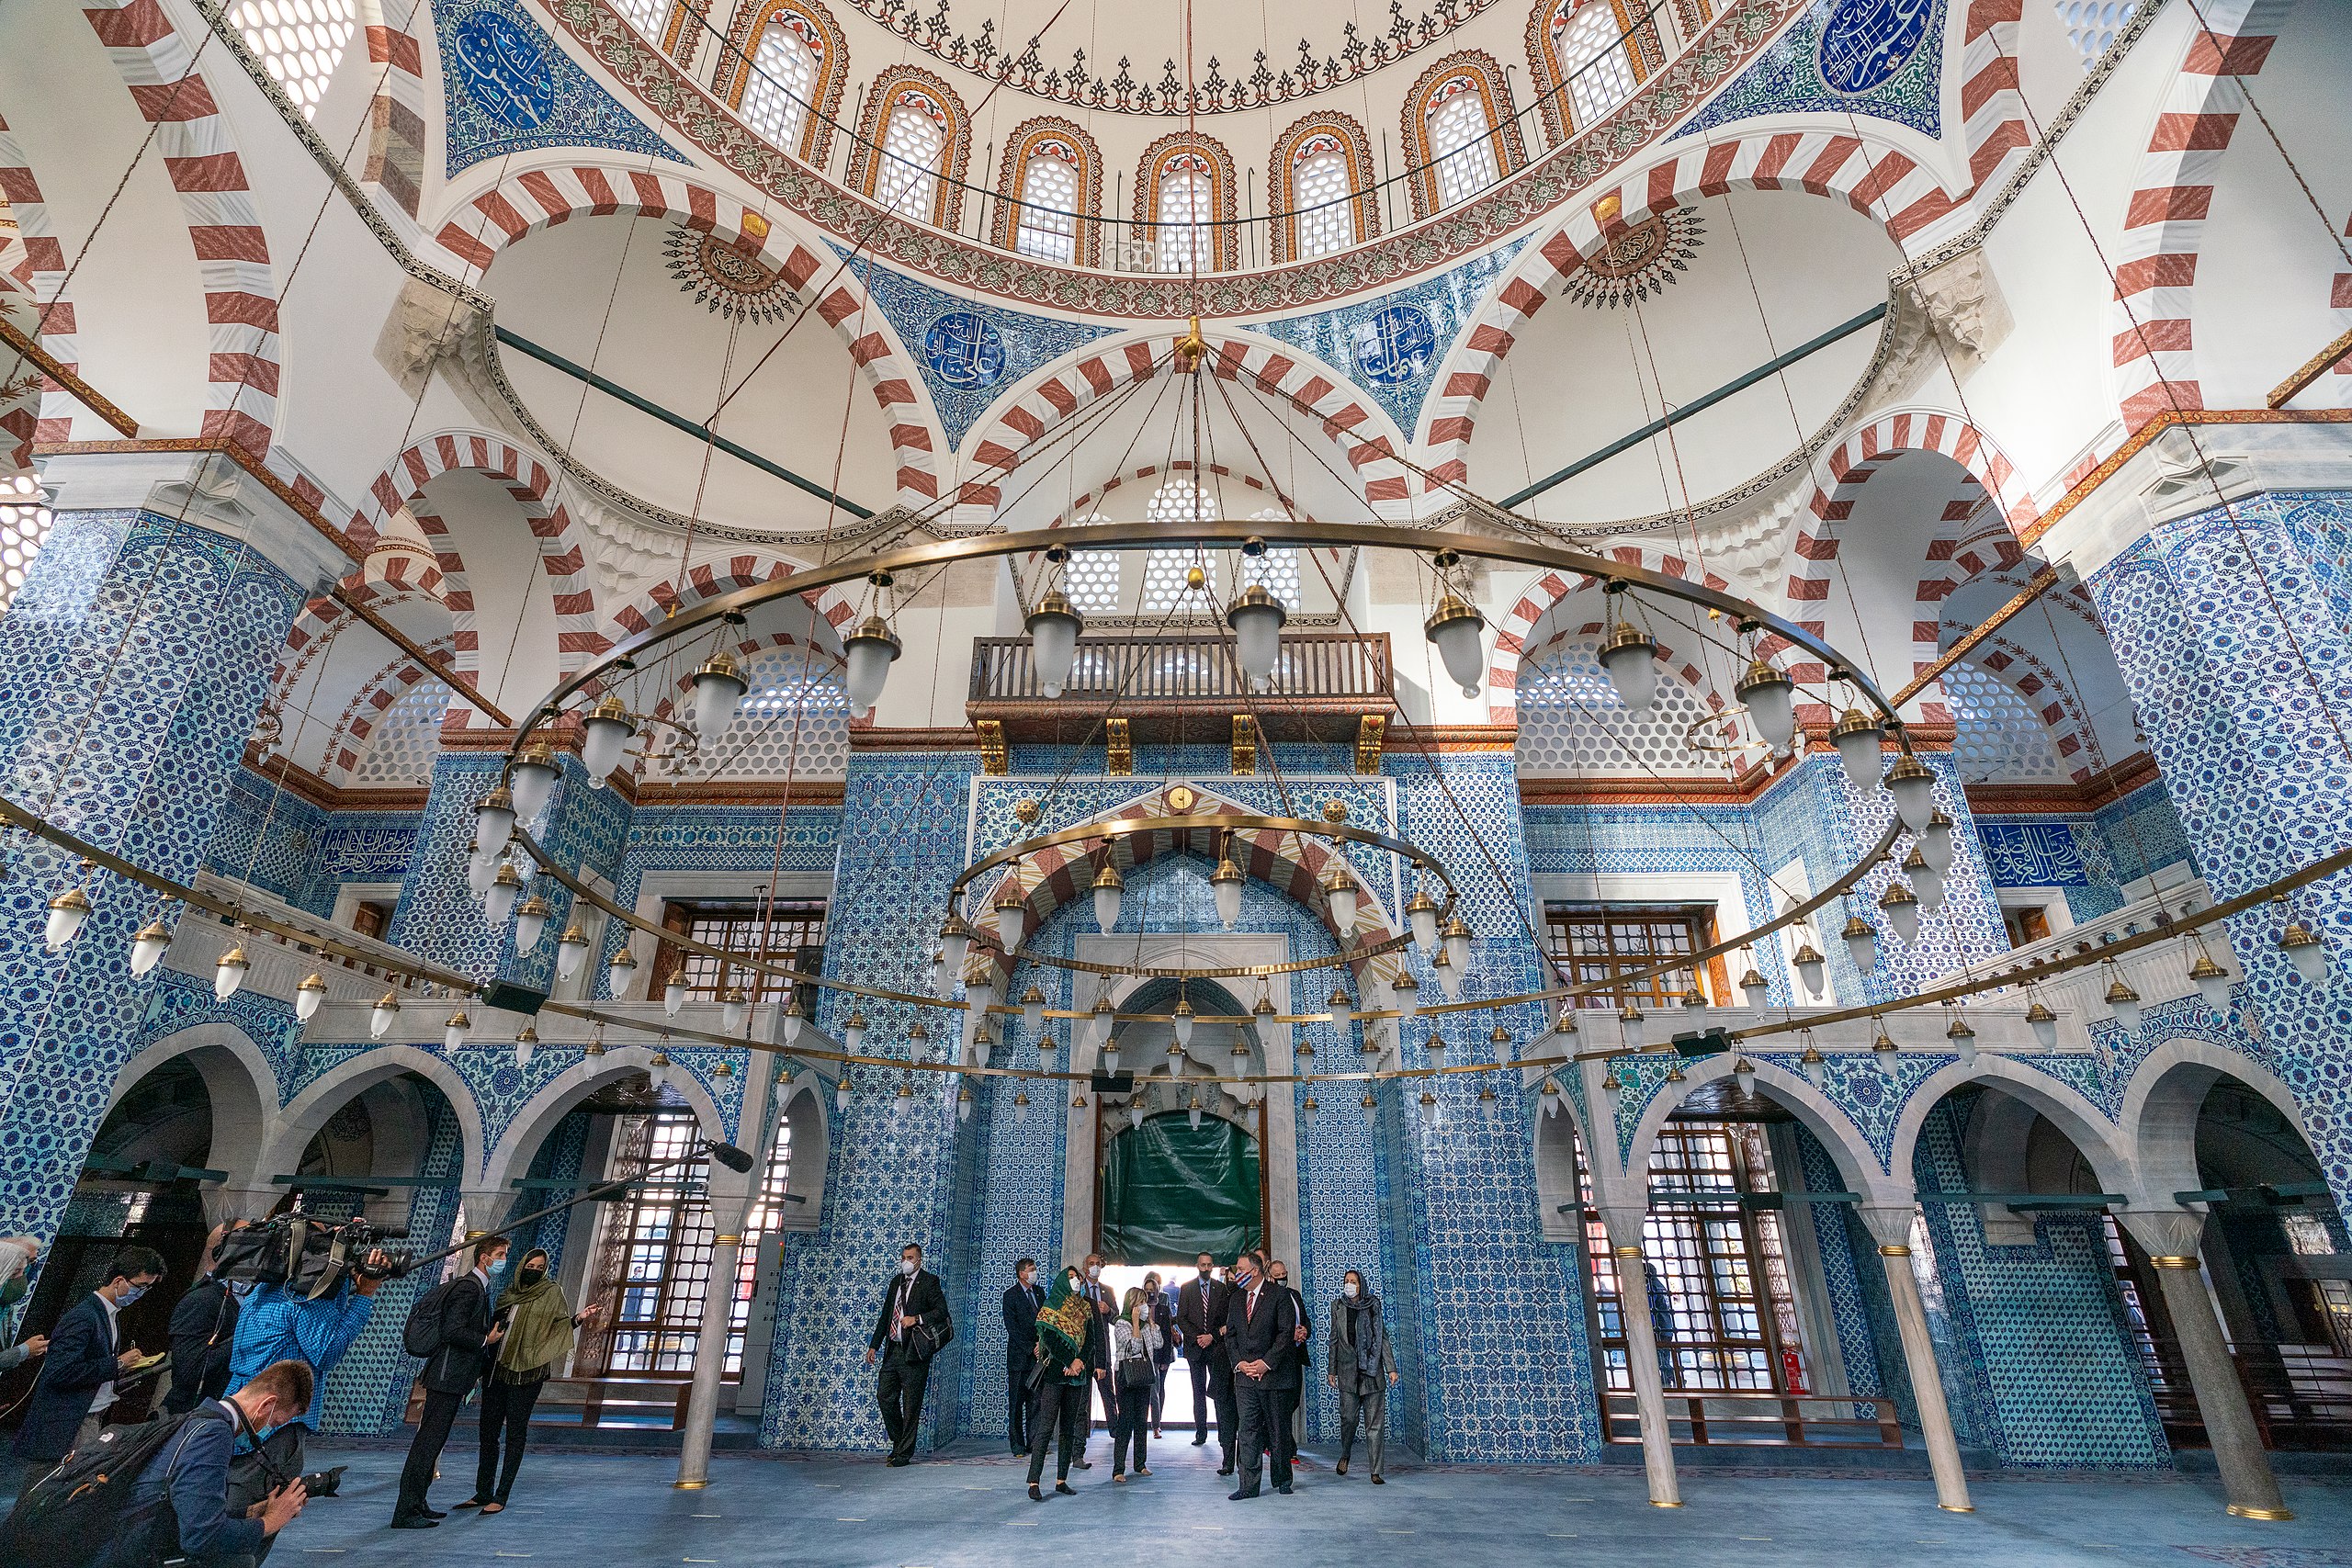 The Rustem Pasha Mosque: A Jewel of Ottoman Architecture in Istanbul